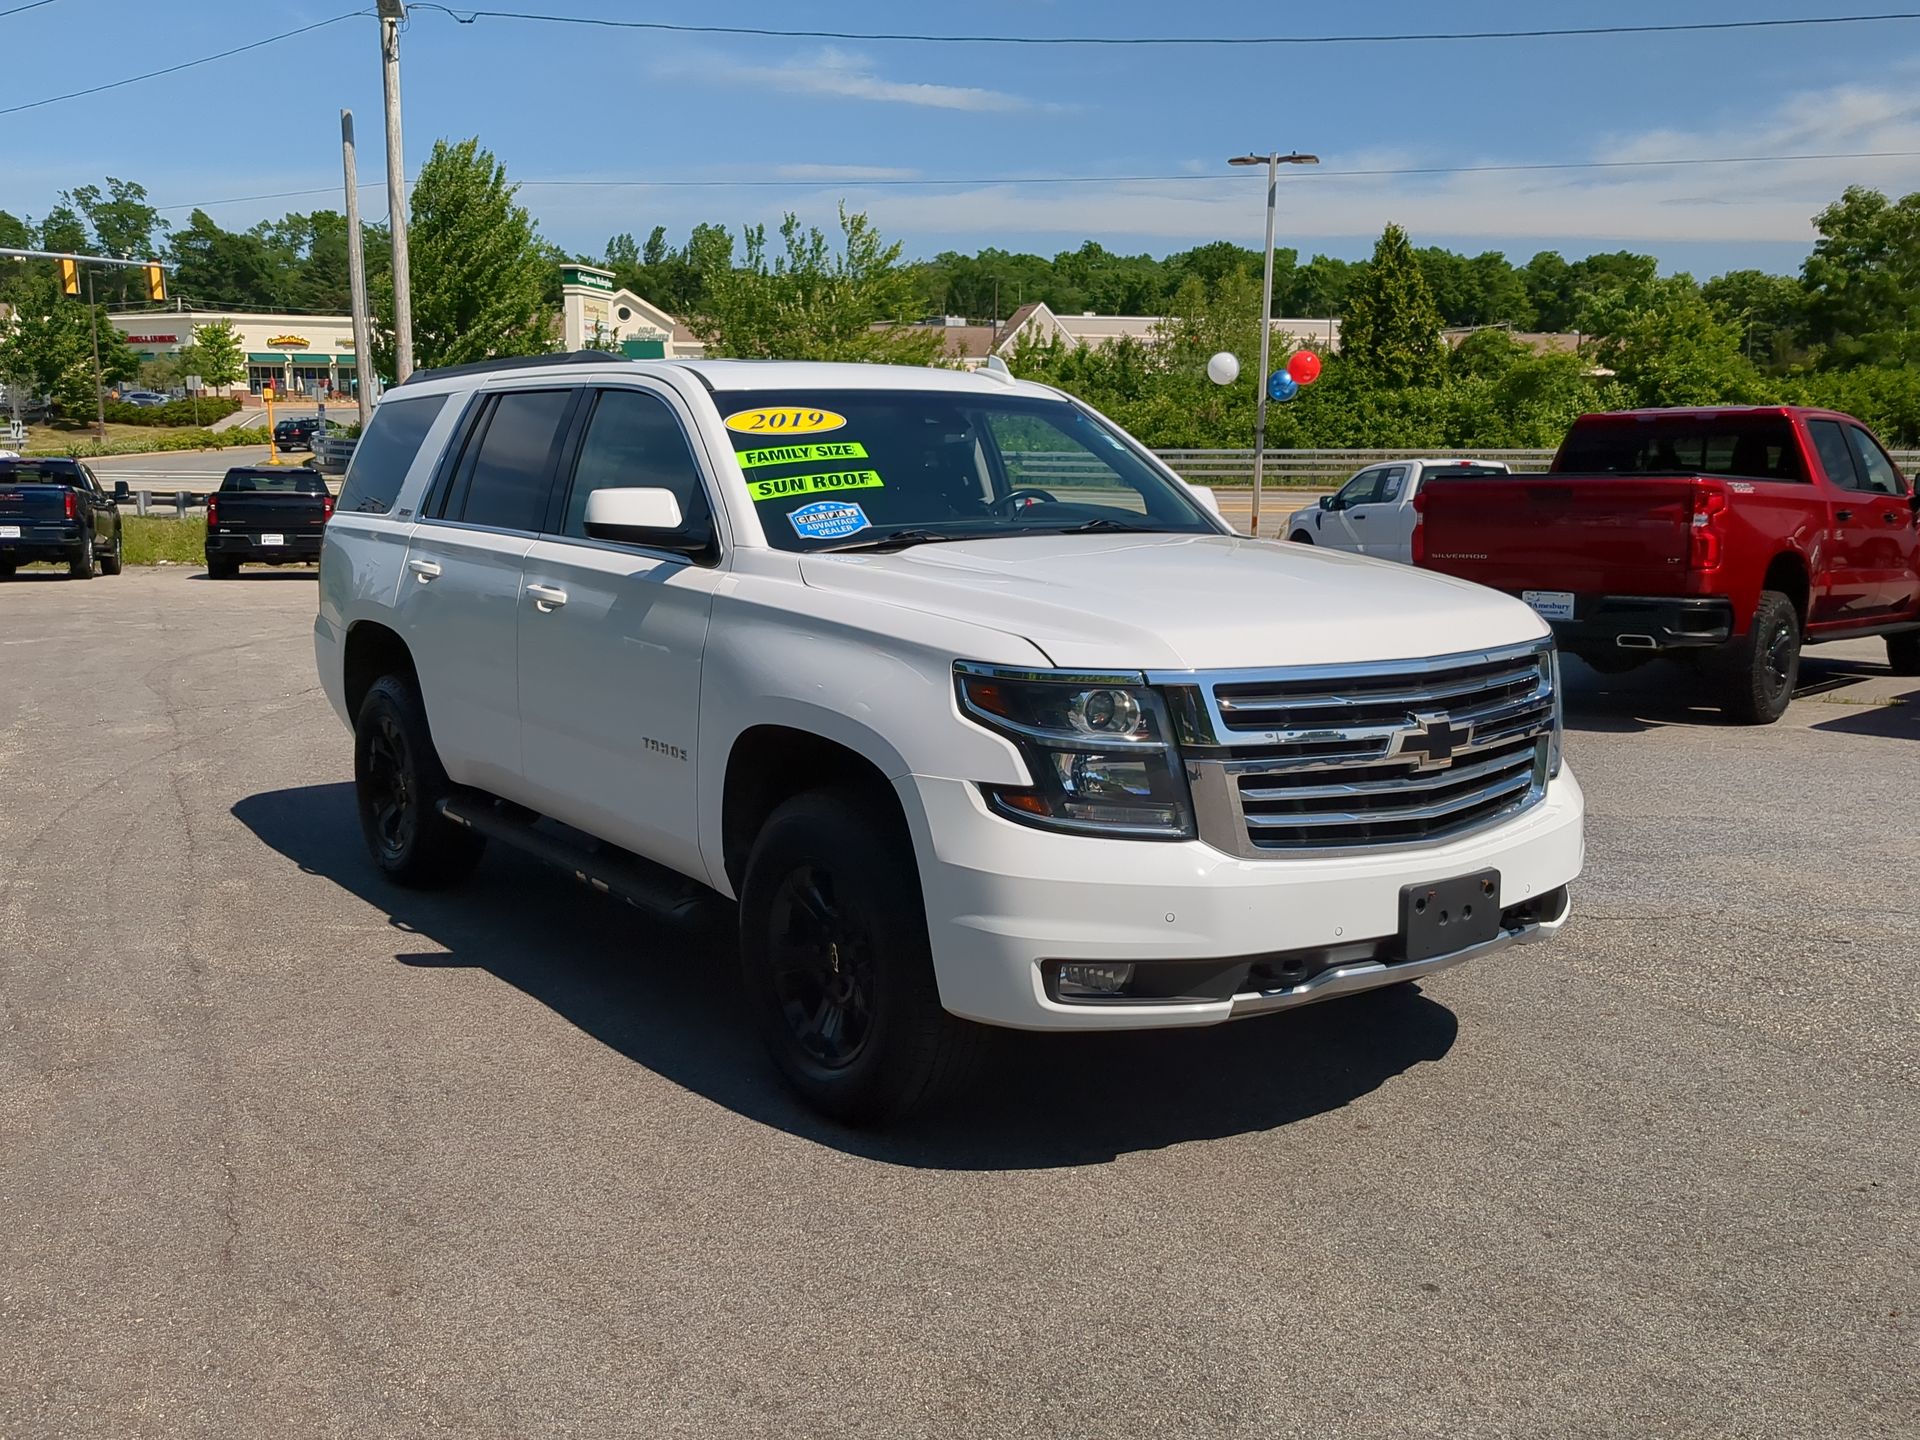 Used 2019 Chevrolet Tahoe LT with VIN 1GNSKBKC2KR189469 for sale in Amesbury, MA